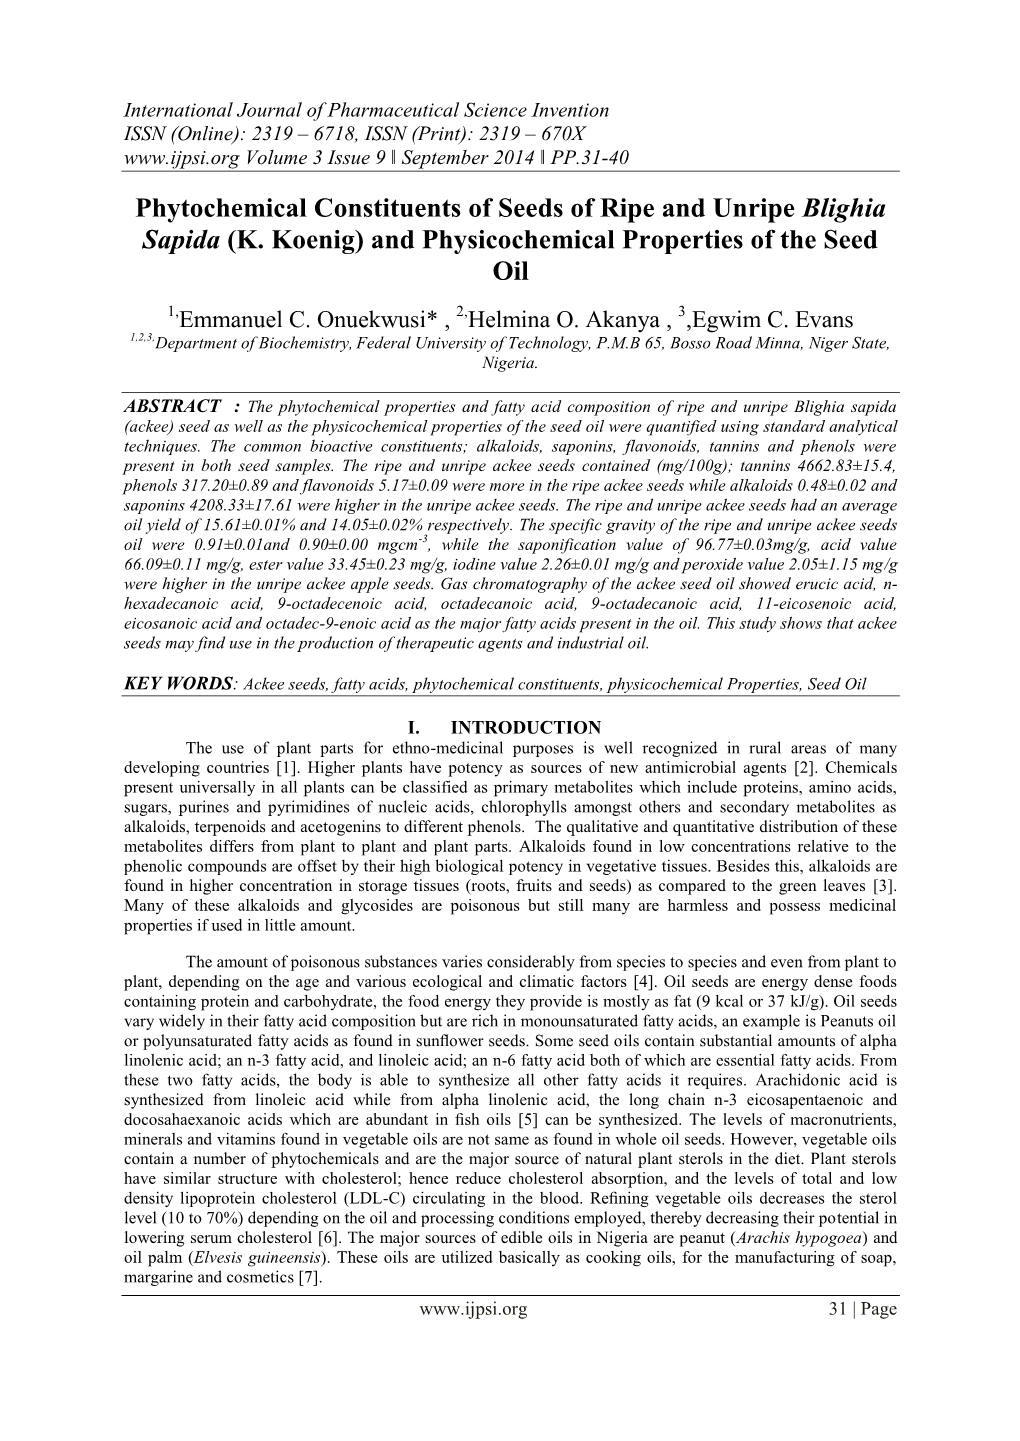 Phytochemical Constituents of Seeds of Ripe and Unripe Blighia Sapida (K